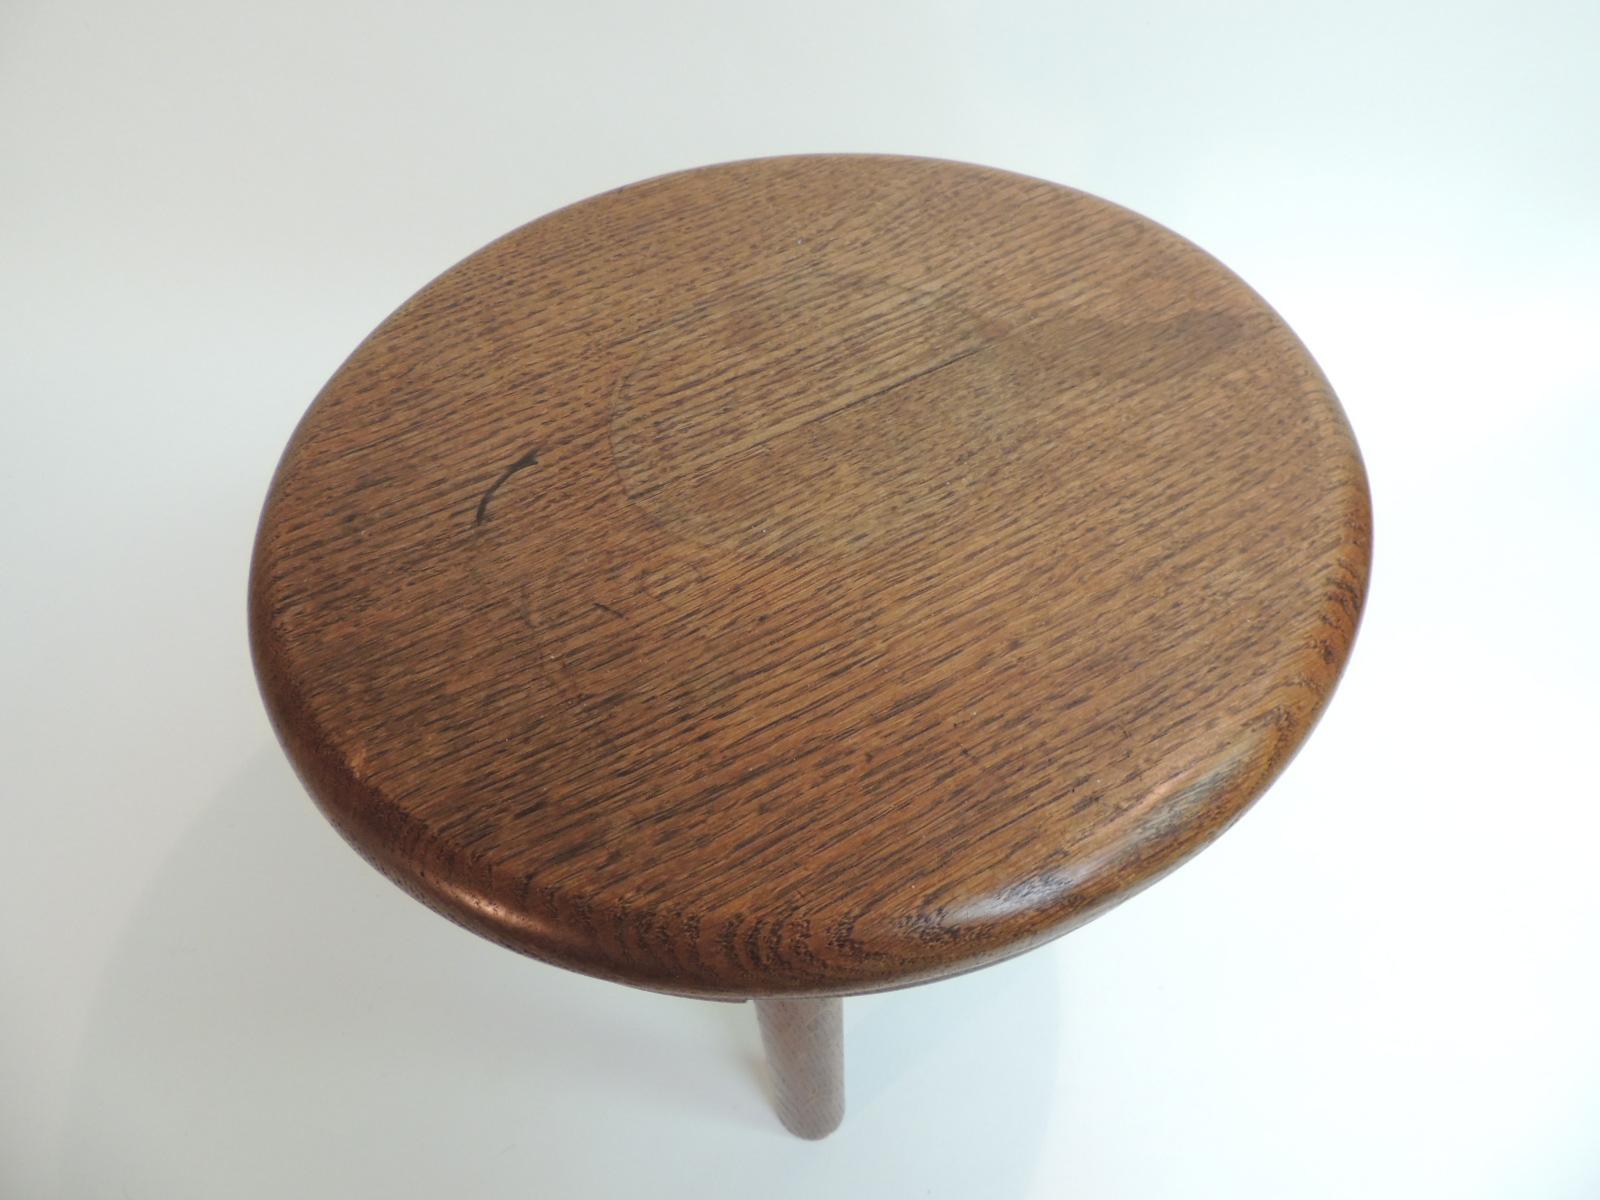 Vintage round Mid-Century Modern low stool or table.
Mid-Century Modern honey color stained, three leg low telephone table or stool.
Wood grain with round tripod legs.
French, 1960s.
Size: 13.5 x 12.5 H.

.